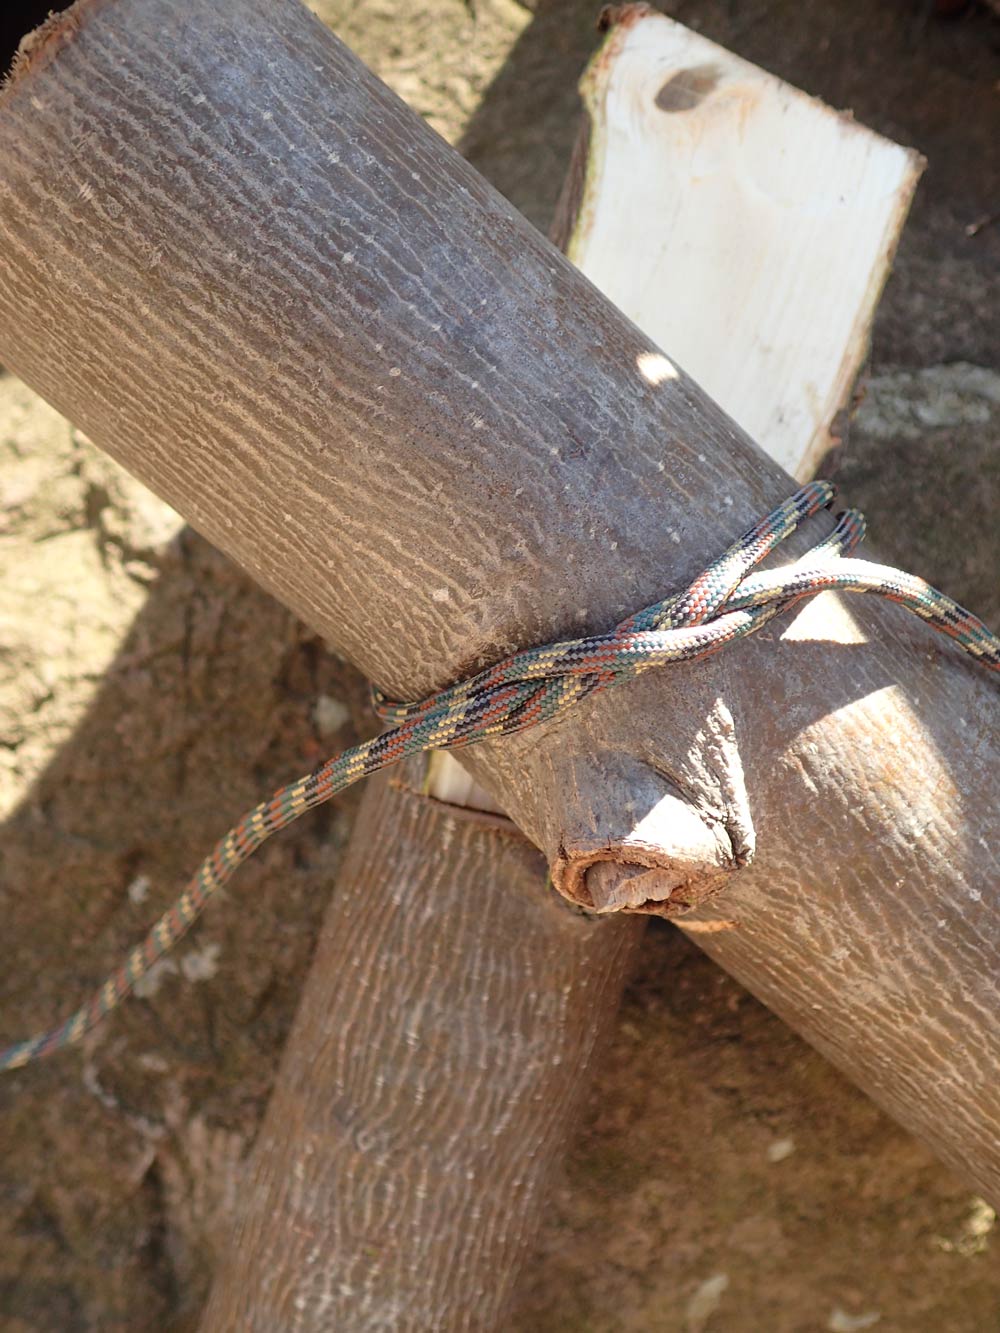 A constrictor knot binds the top two diagonal pieces.